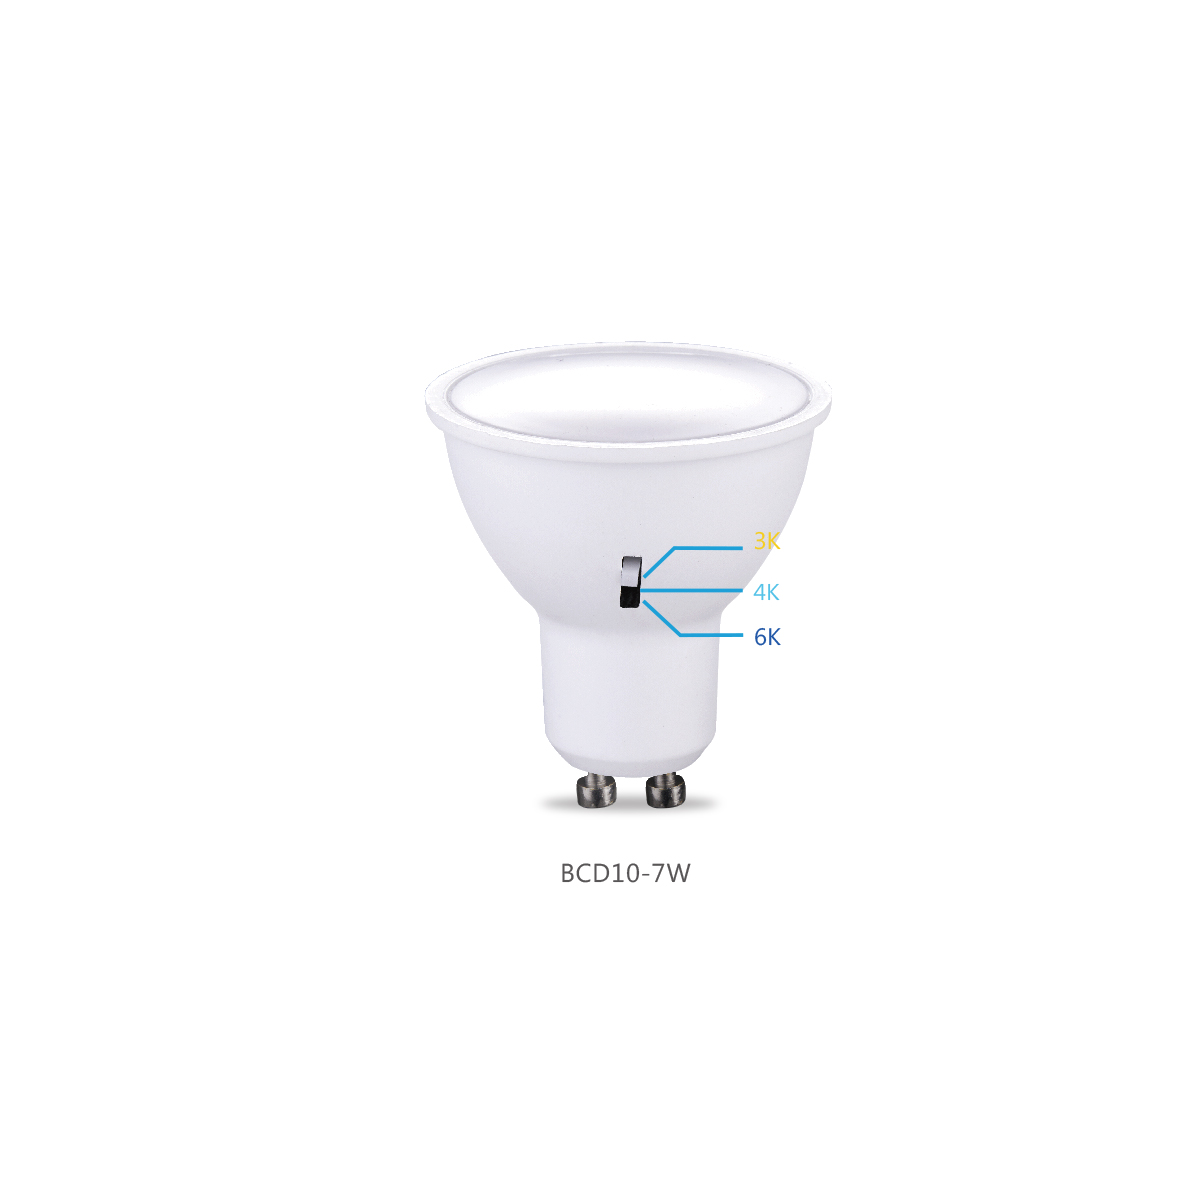 Factory Price For Yellow Light Bulb - 3CCT Patent Bulb BCD10-7W – HANNORLUX